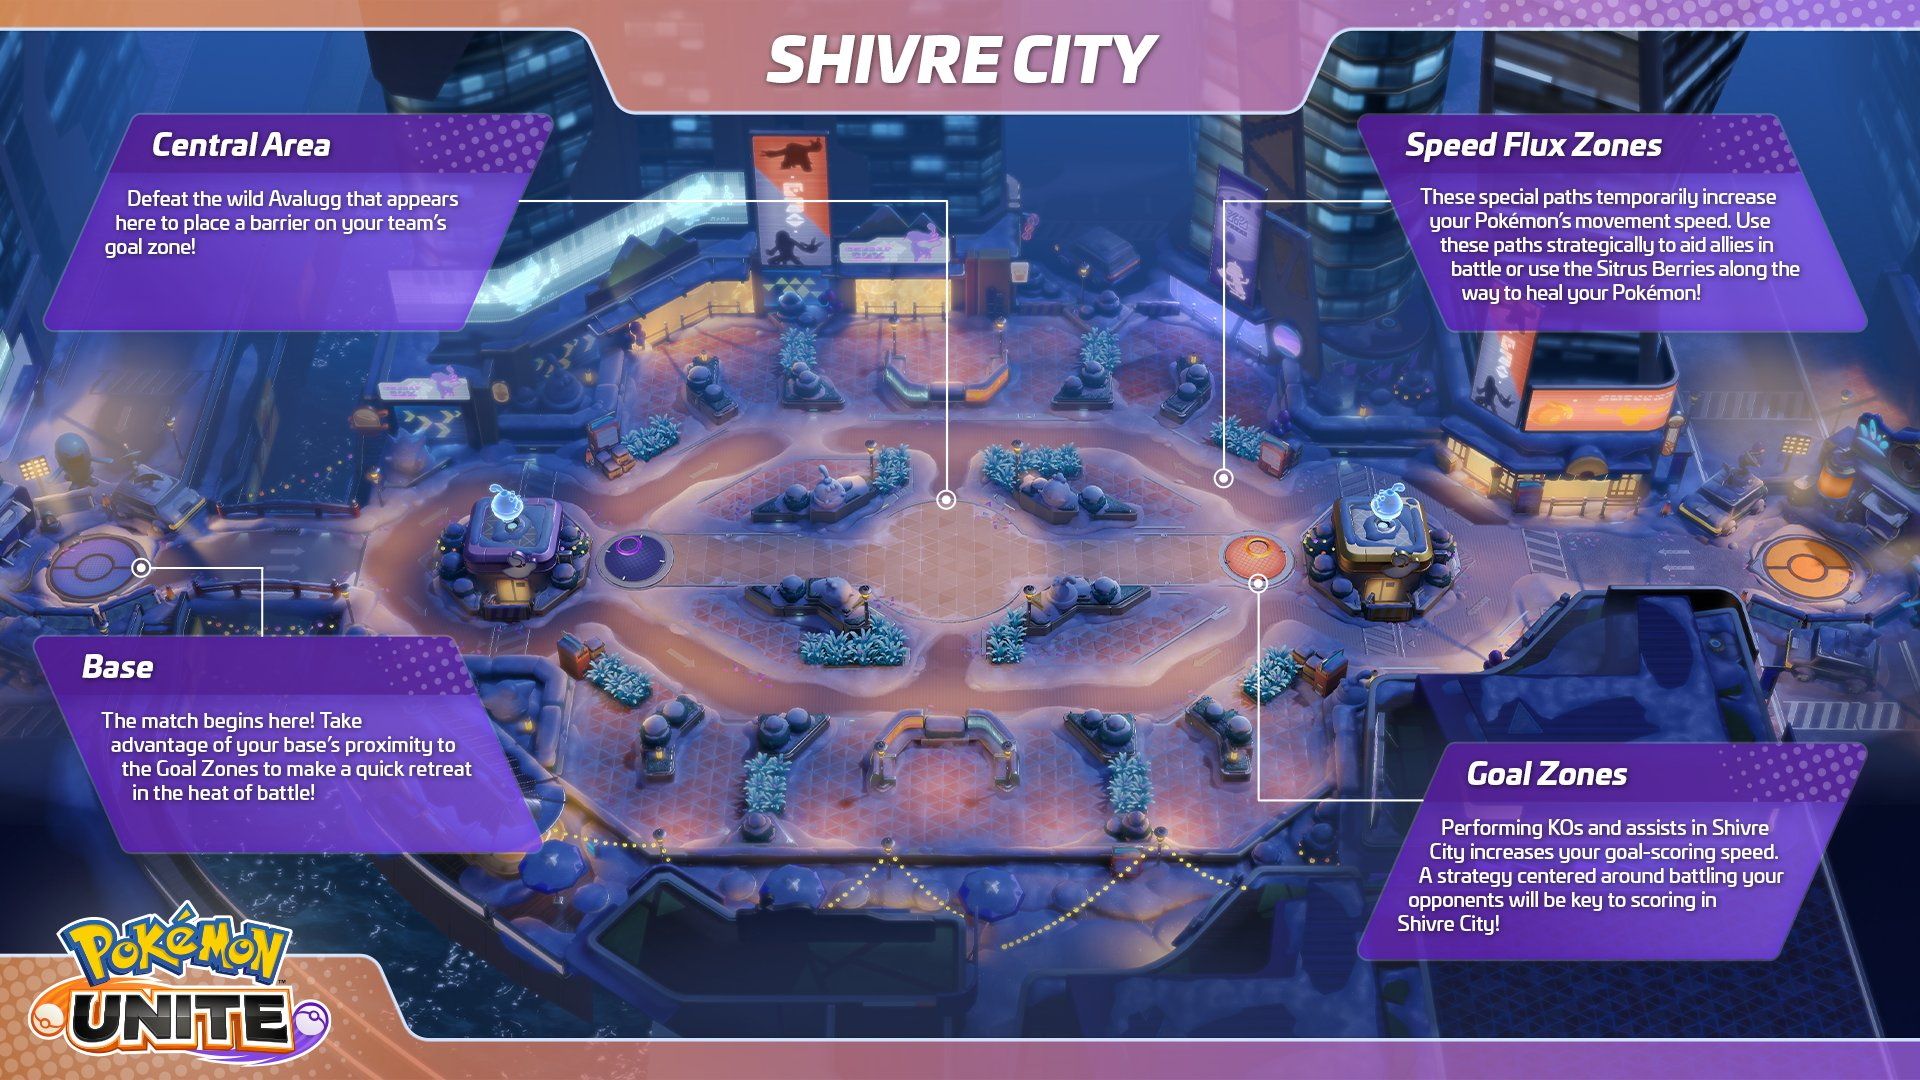 Shivre City map and labels from Pokemon Unite